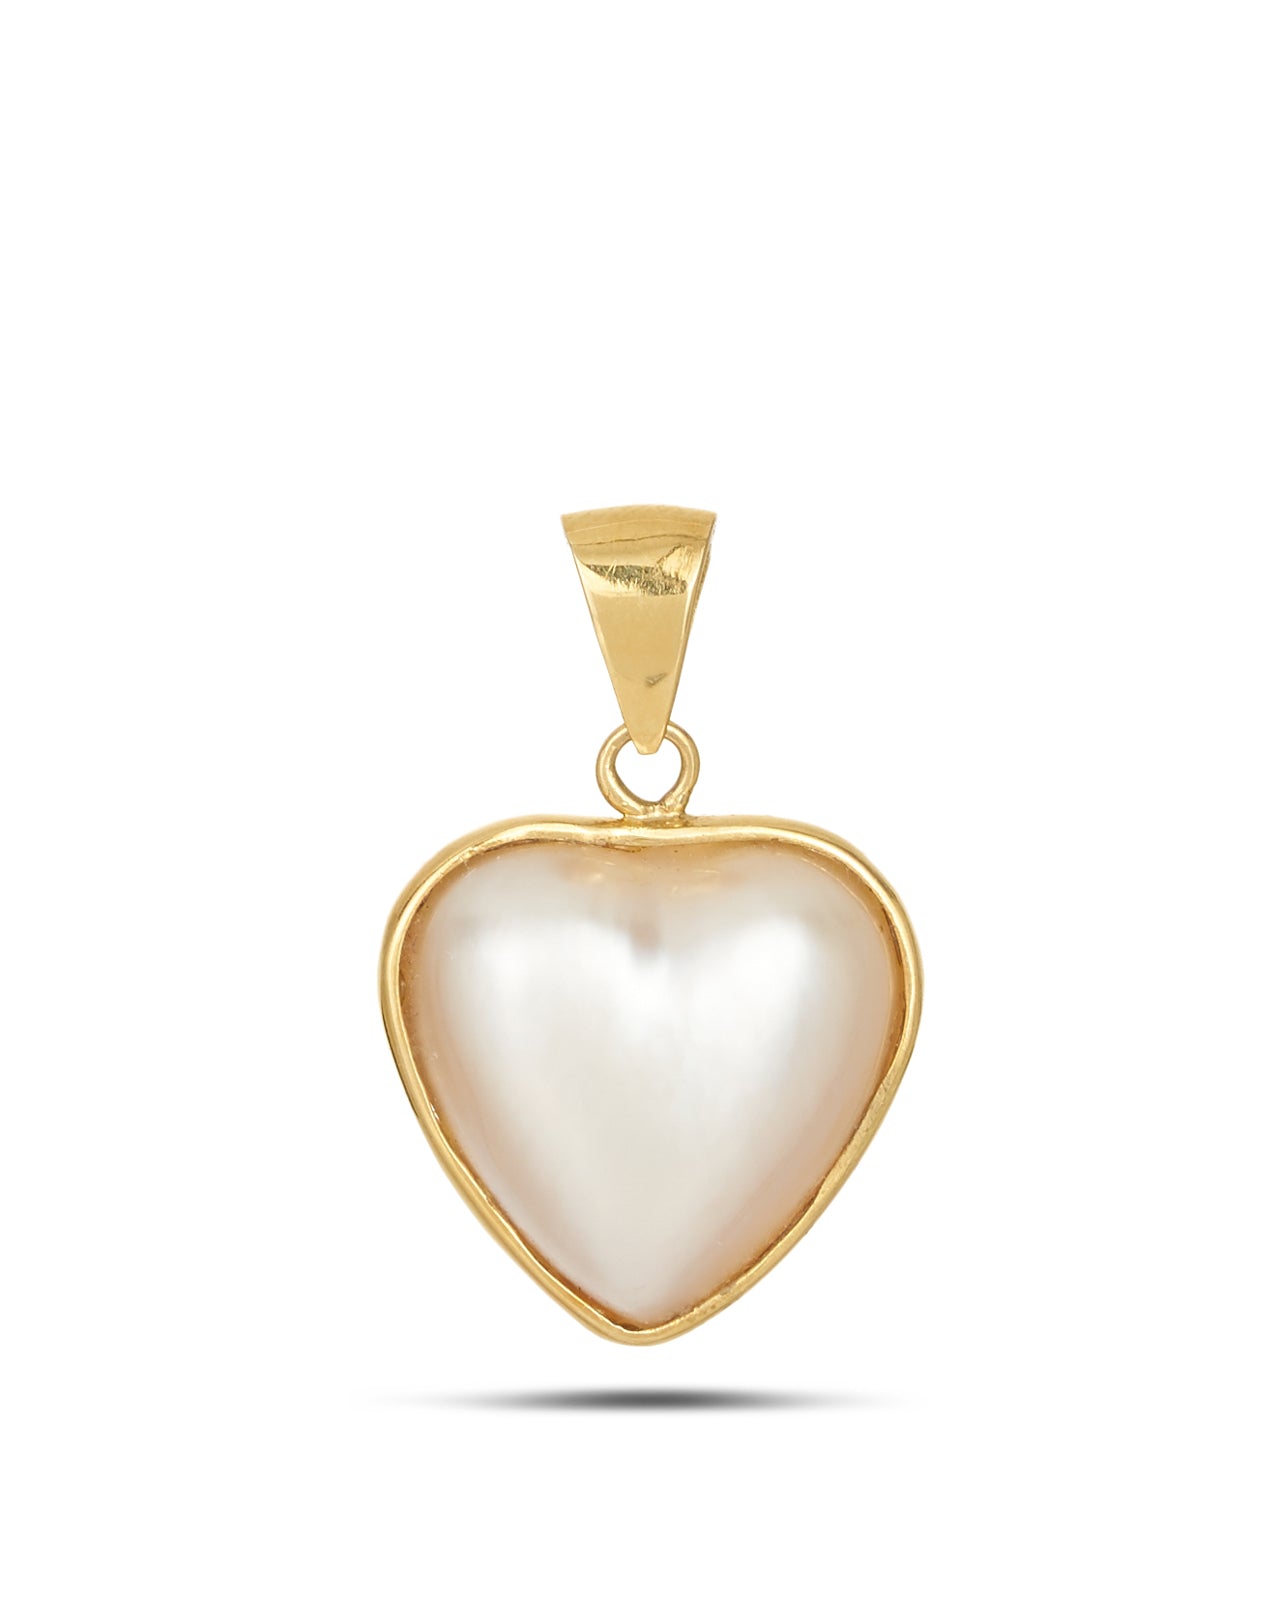 Vintage gold & mabe pearl heart pendant